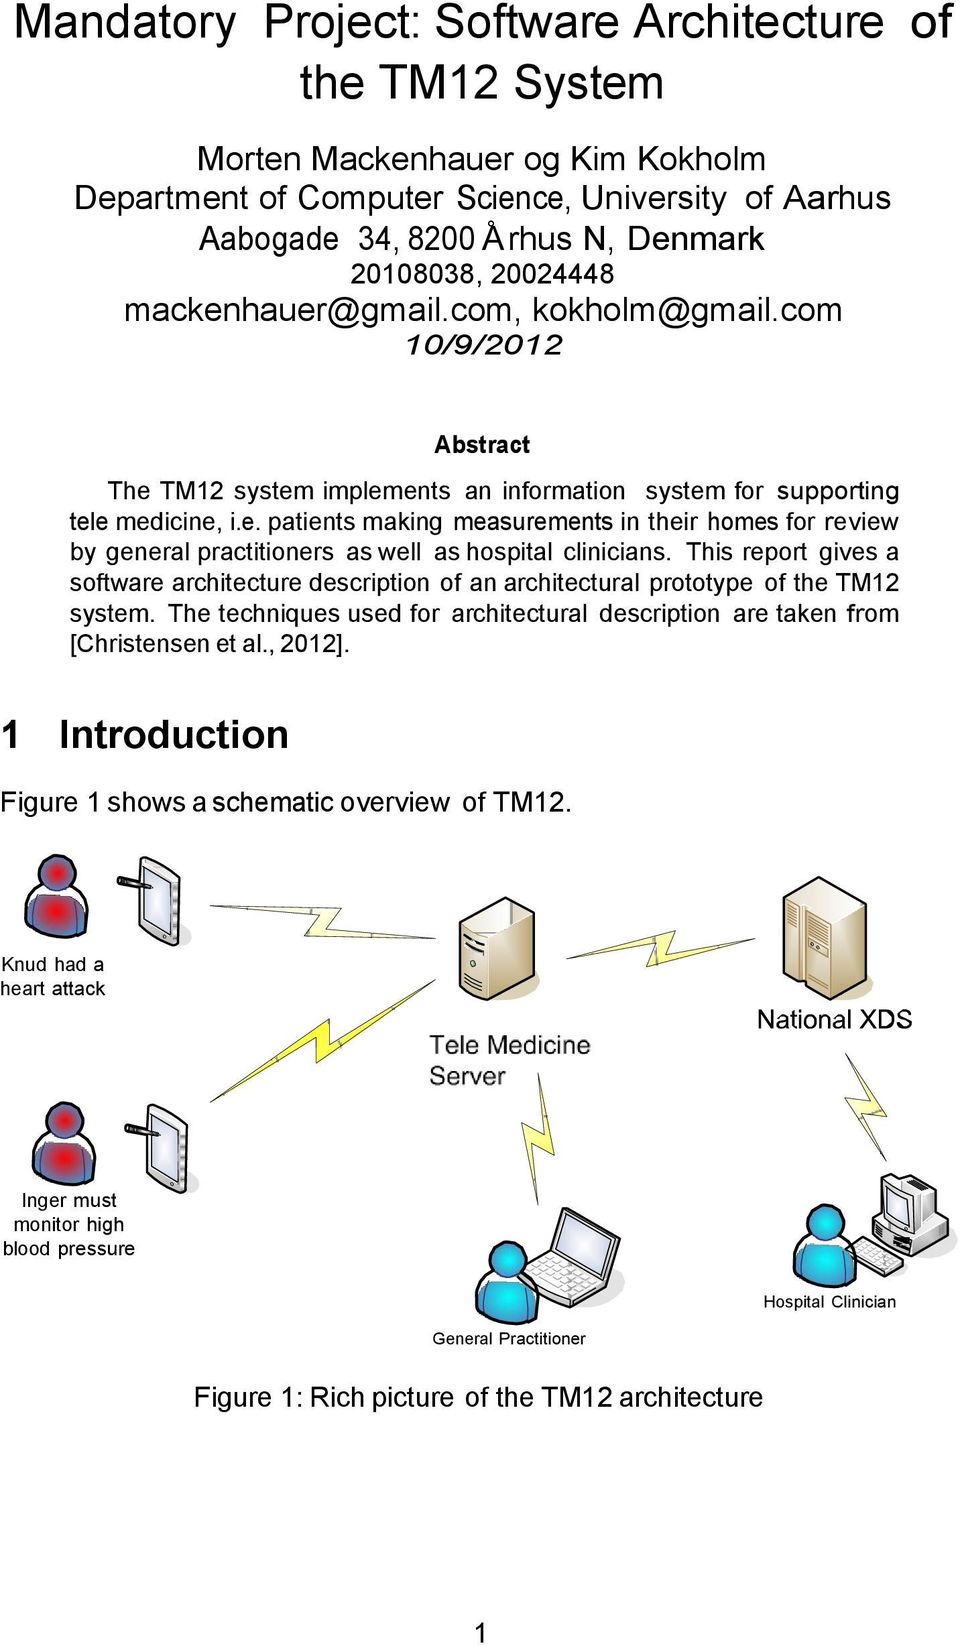 This report gives a software architecture description of an architectural prototype of the TM12 system. The techniques used for architectural description are taken from [Christensen et al., 2012].